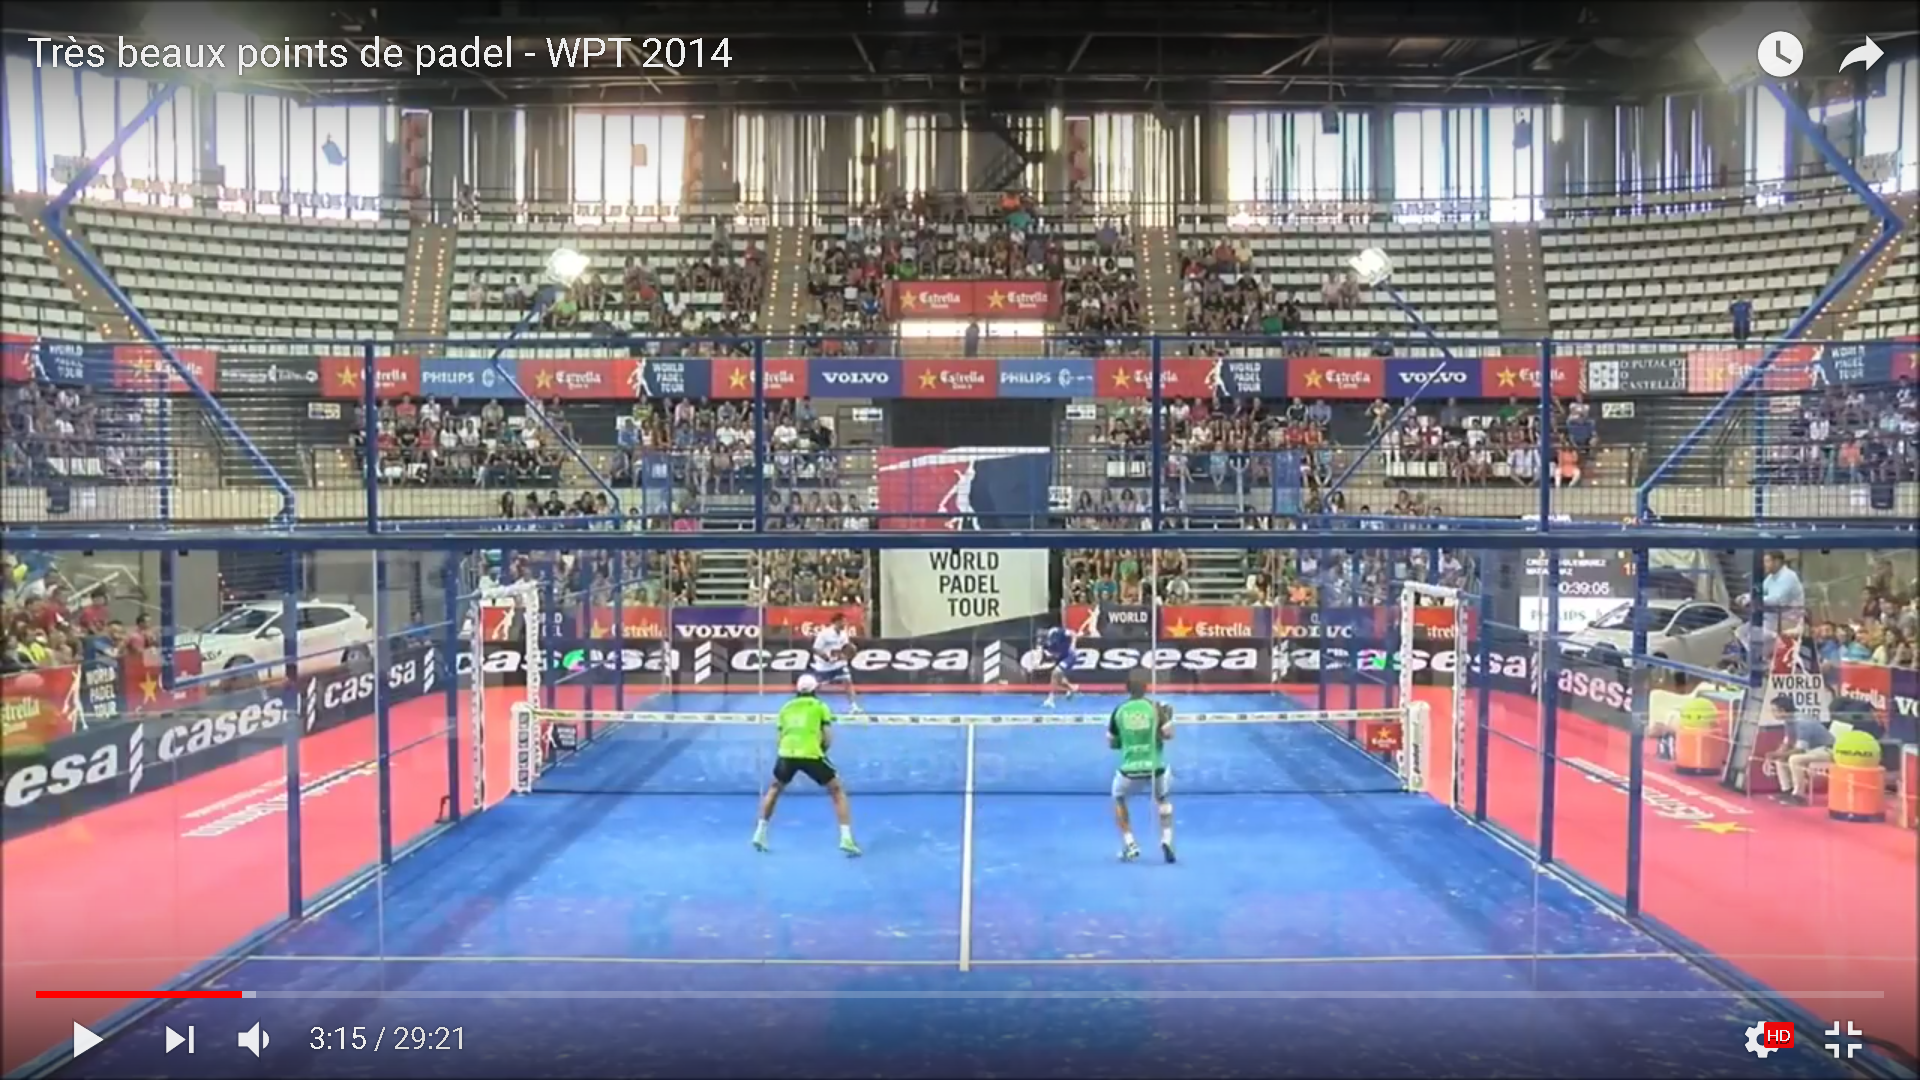 Very beautiful points of padel - WPT 2014